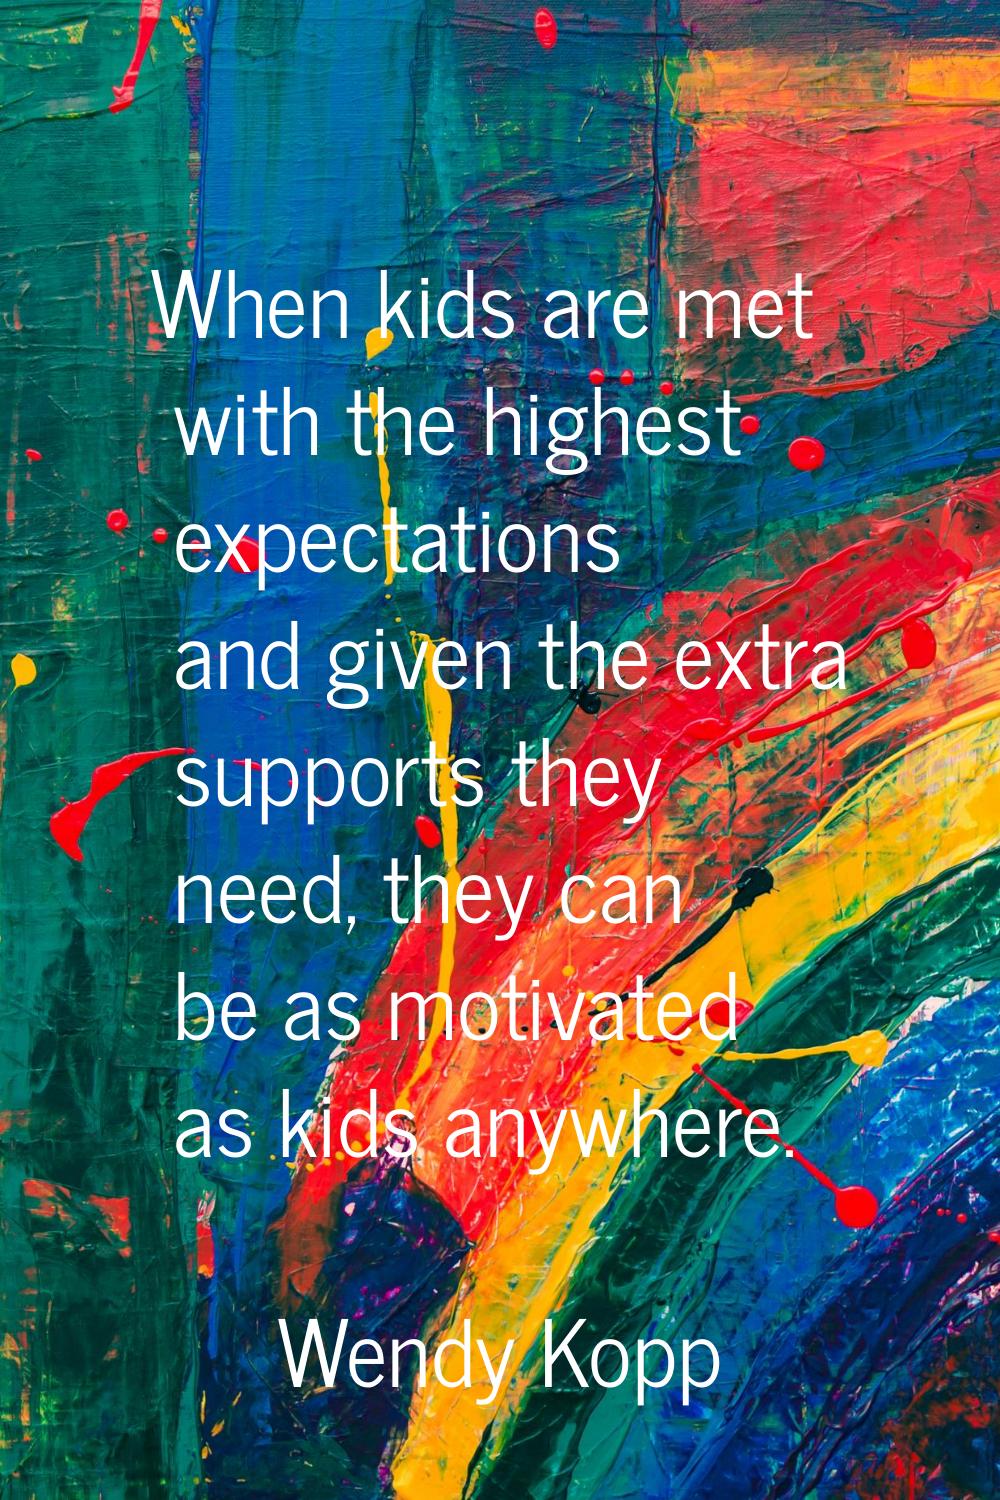 When kids are met with the highest expectations and given the extra supports they need, they can be